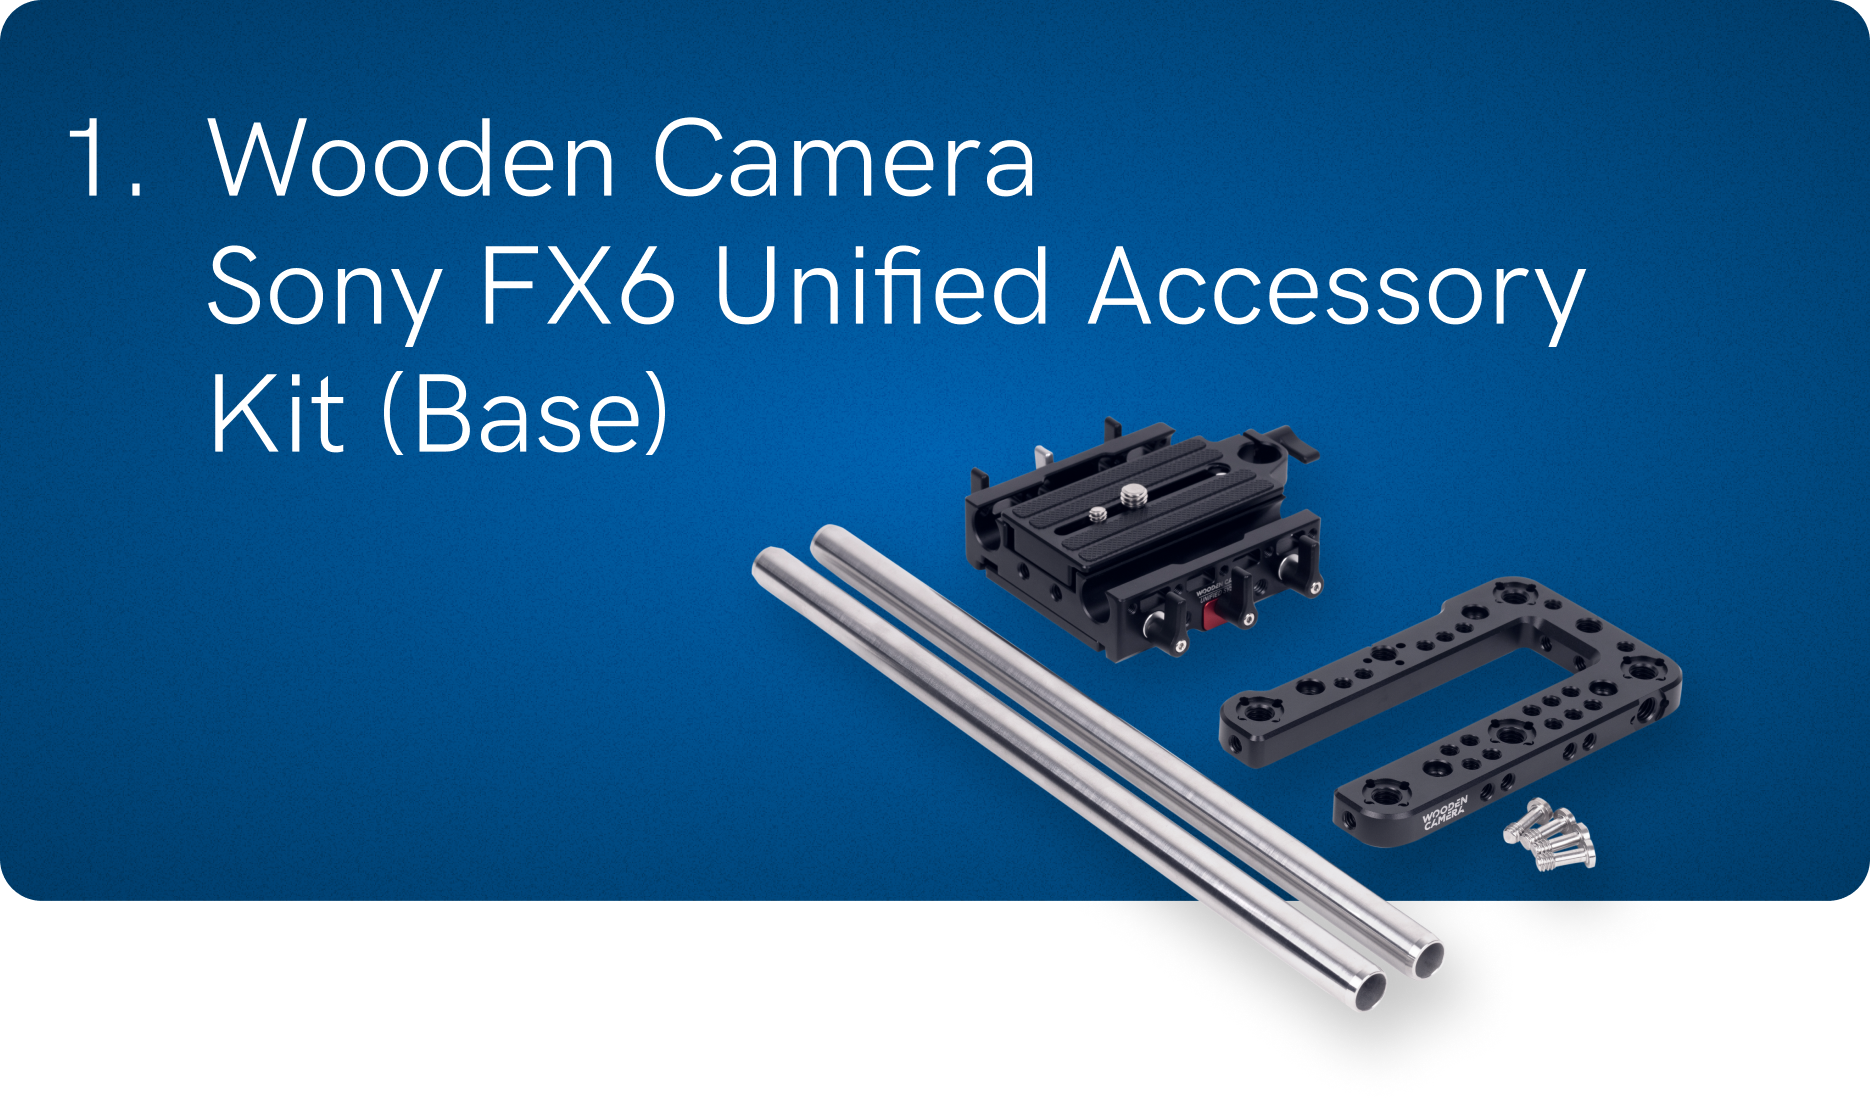 1. Wooden Camera Sony FX6 Unified Accessory Kit(Base)